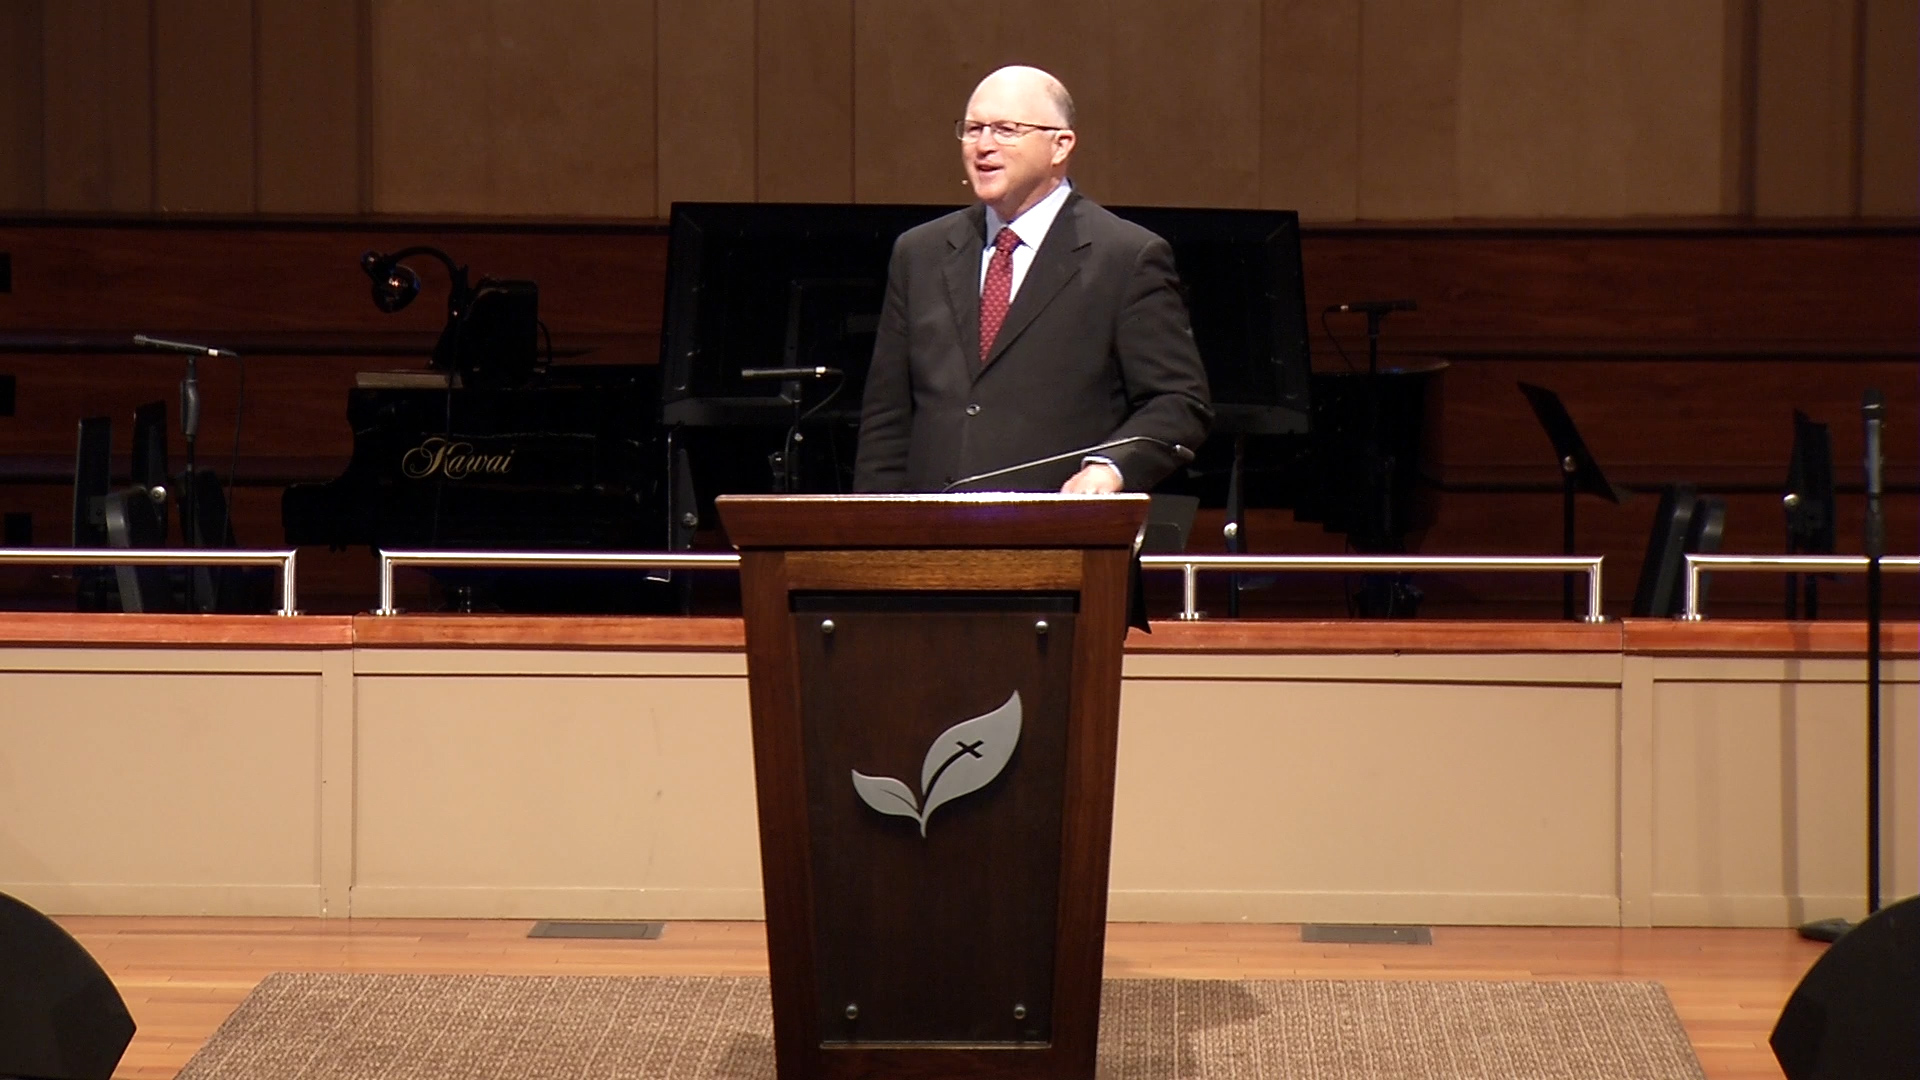 Pastor Paul Chappell: A Heart for Revival